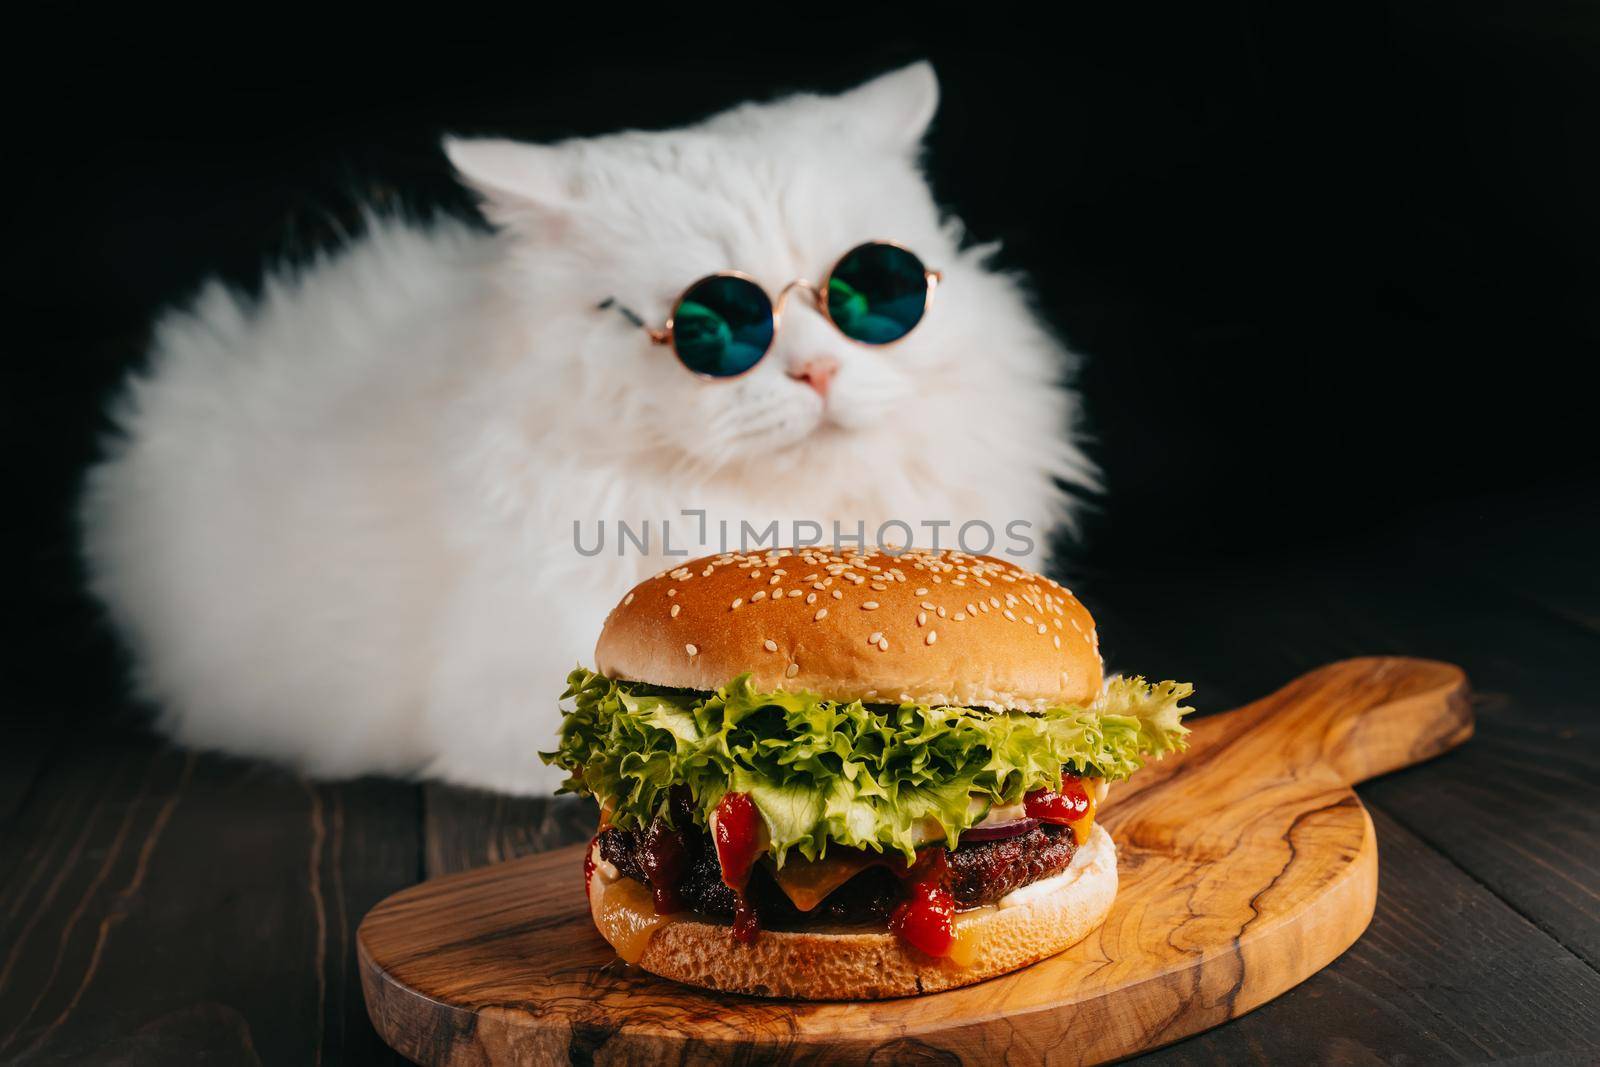 Cute fluffy cat in sunglasses near burger on dark background. Kitty with tasty fast food meal with meat cutlet, onion, vegetables, melted cheese and sauce. by kristina_kokhanova